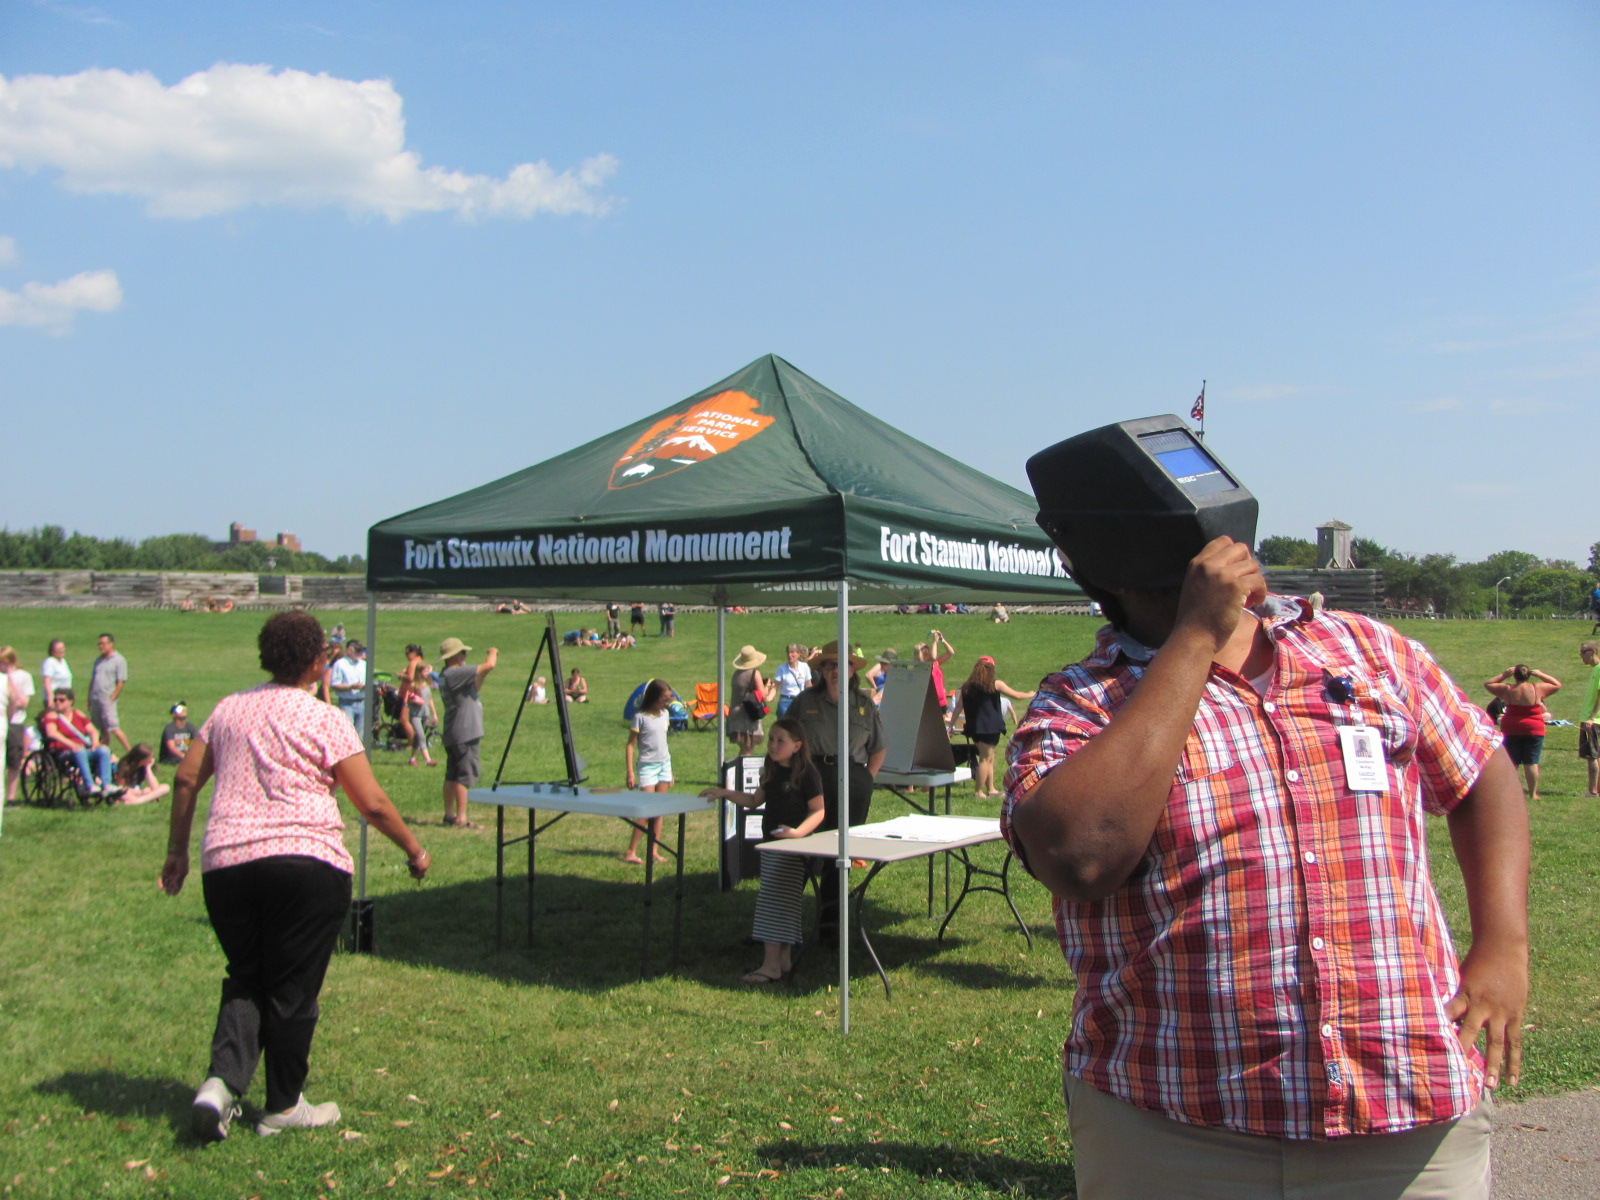 A man stands staring towards the sunny, clear sky, a welding mask over his head. Behind him a park ranger speaks to a group of people under a tent.